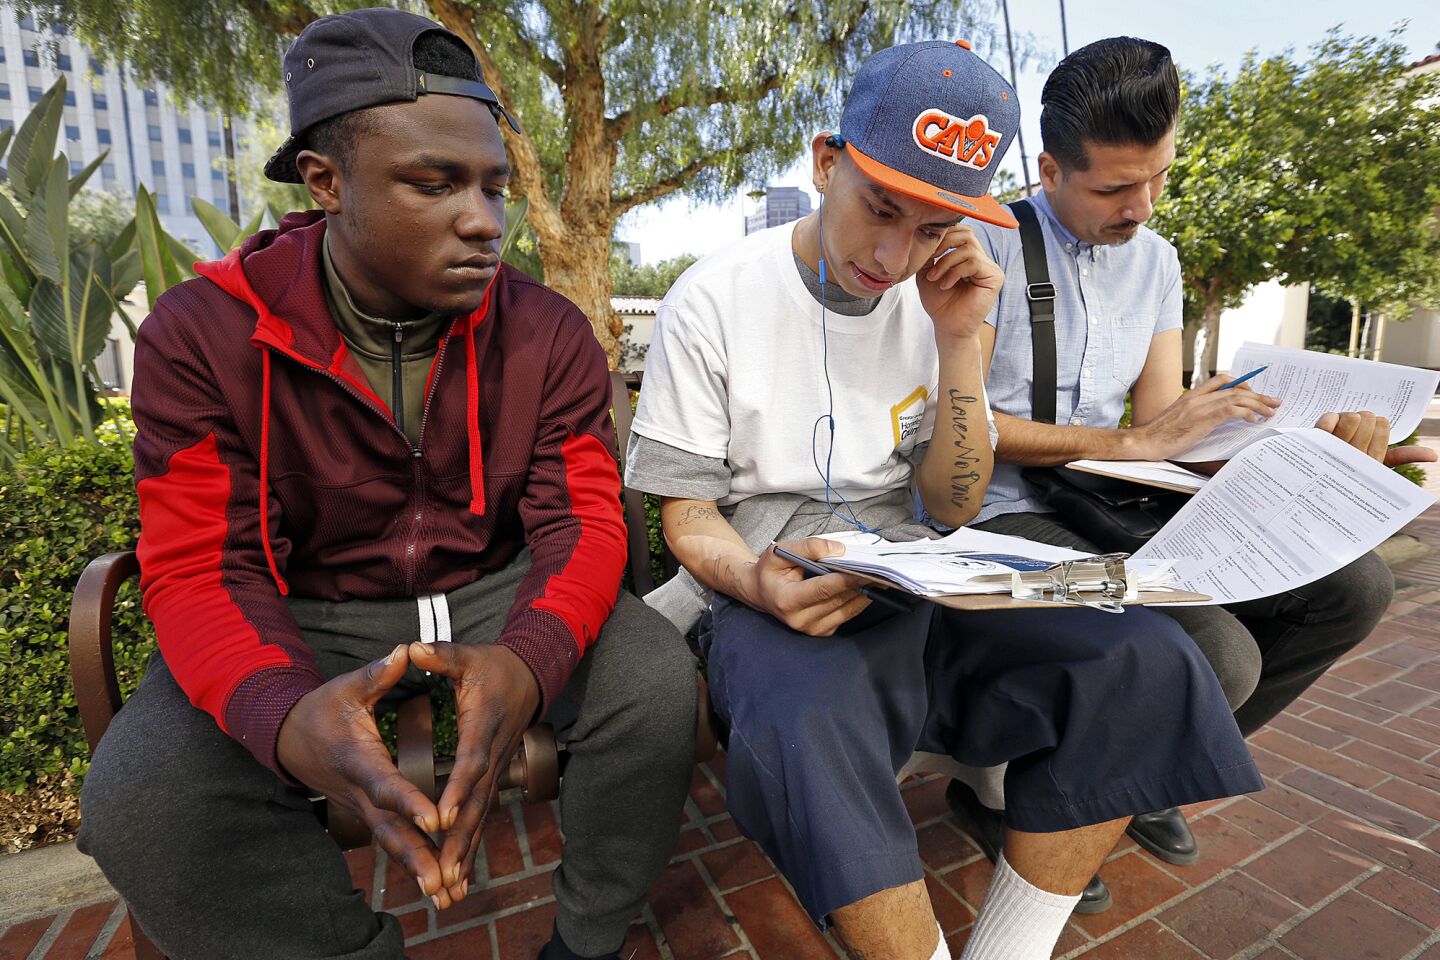 L.A.'s homeless young people